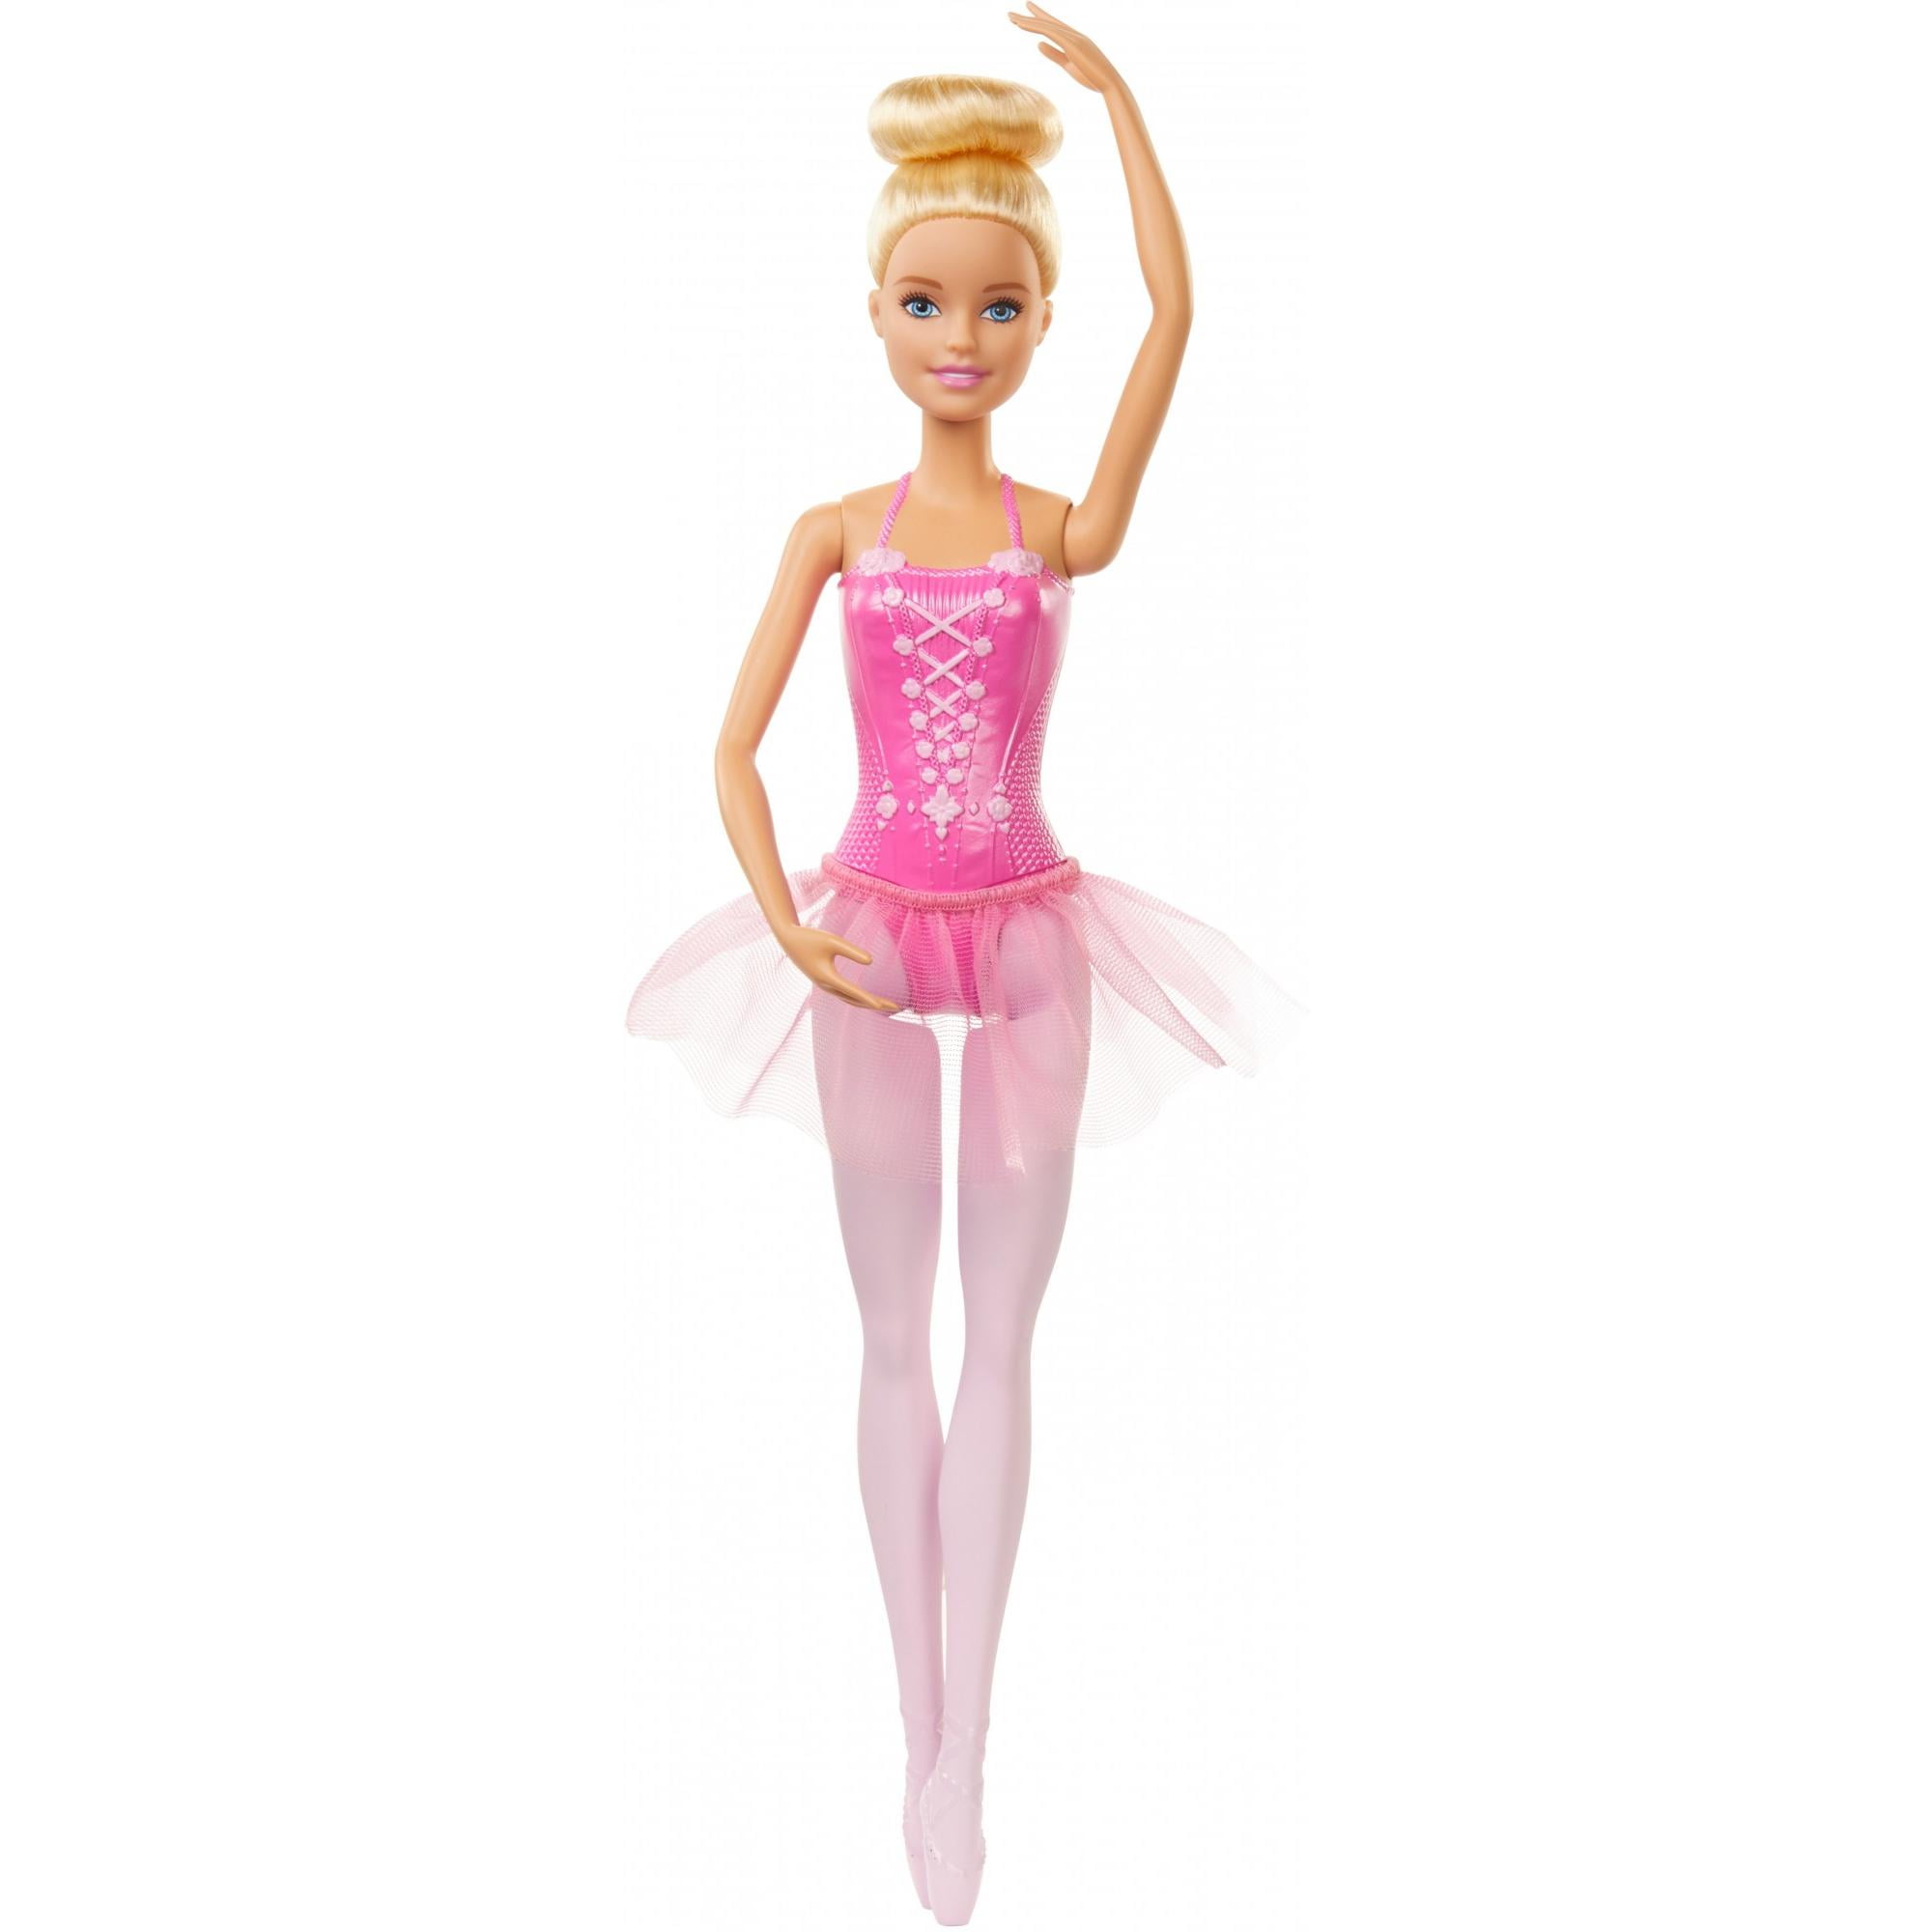 Barbie Career Ballerina Doll with Tutu and Sculpted Toe Shoes, Blonde Hair